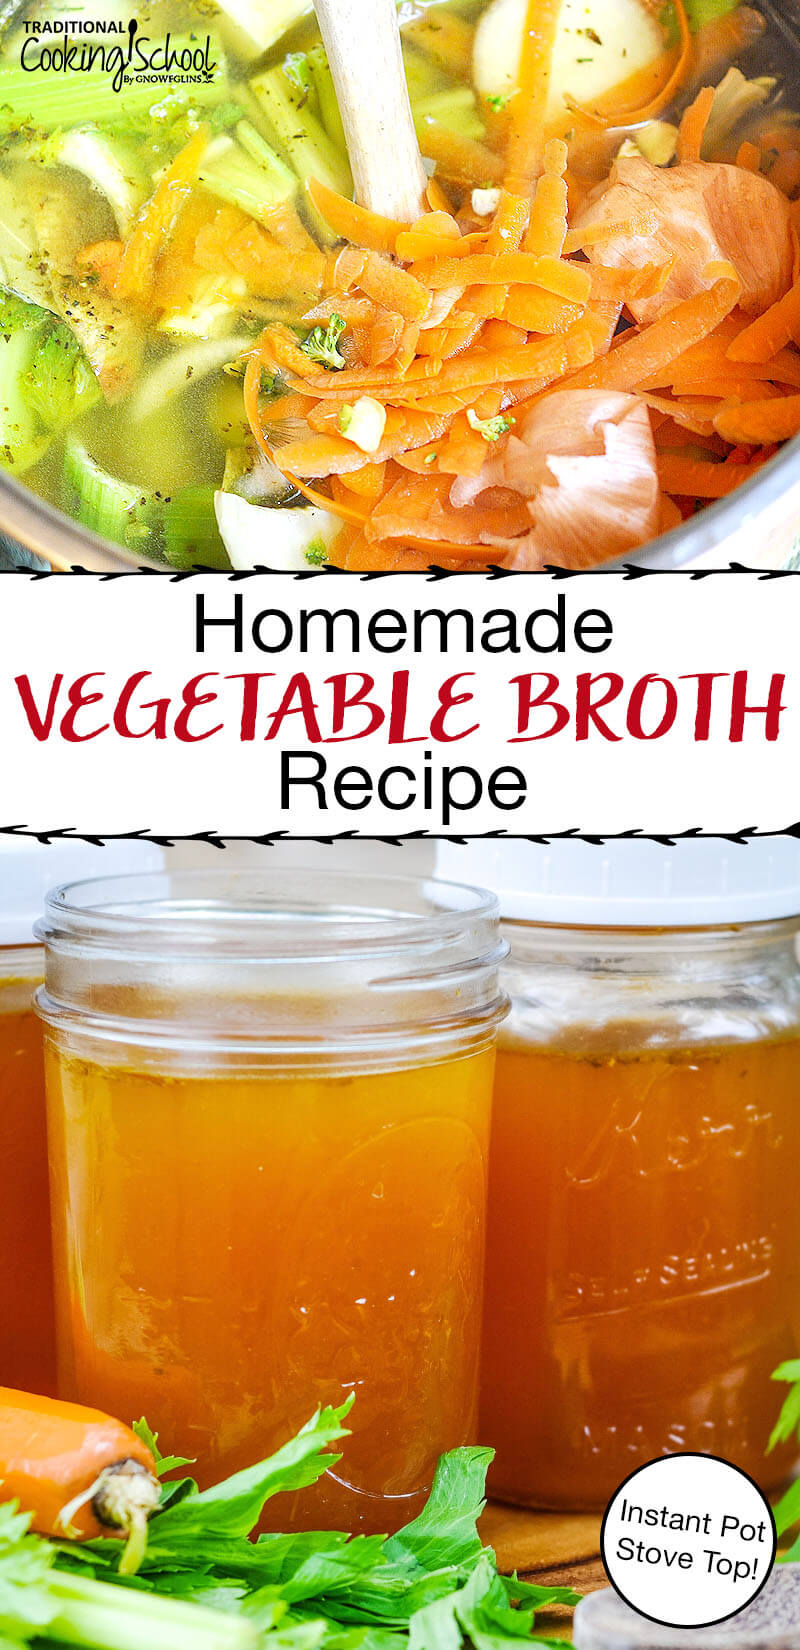 photo collage of veggie scraps and pint-sized jars of amber-colored liquid, with text overlay: "Homemade Vegetable Broth Recipe (Instant Pot, Stove Top!)"